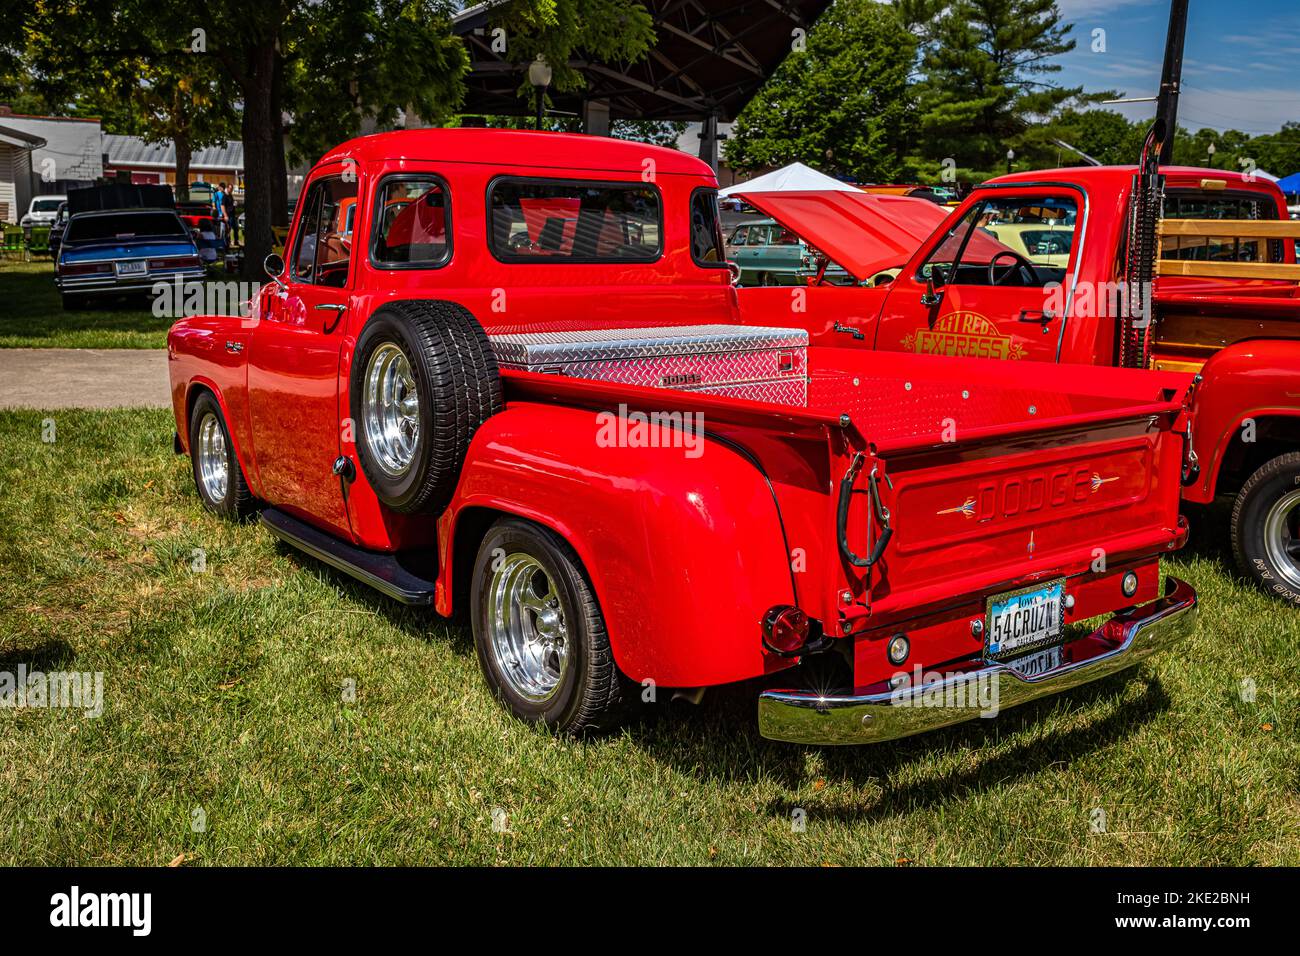 Des Moines, IA - July 02, 2022: High perspective rear corner view of a 1954 Dodge C1 B6 Pickup Truck at a local car show. Stock Photo